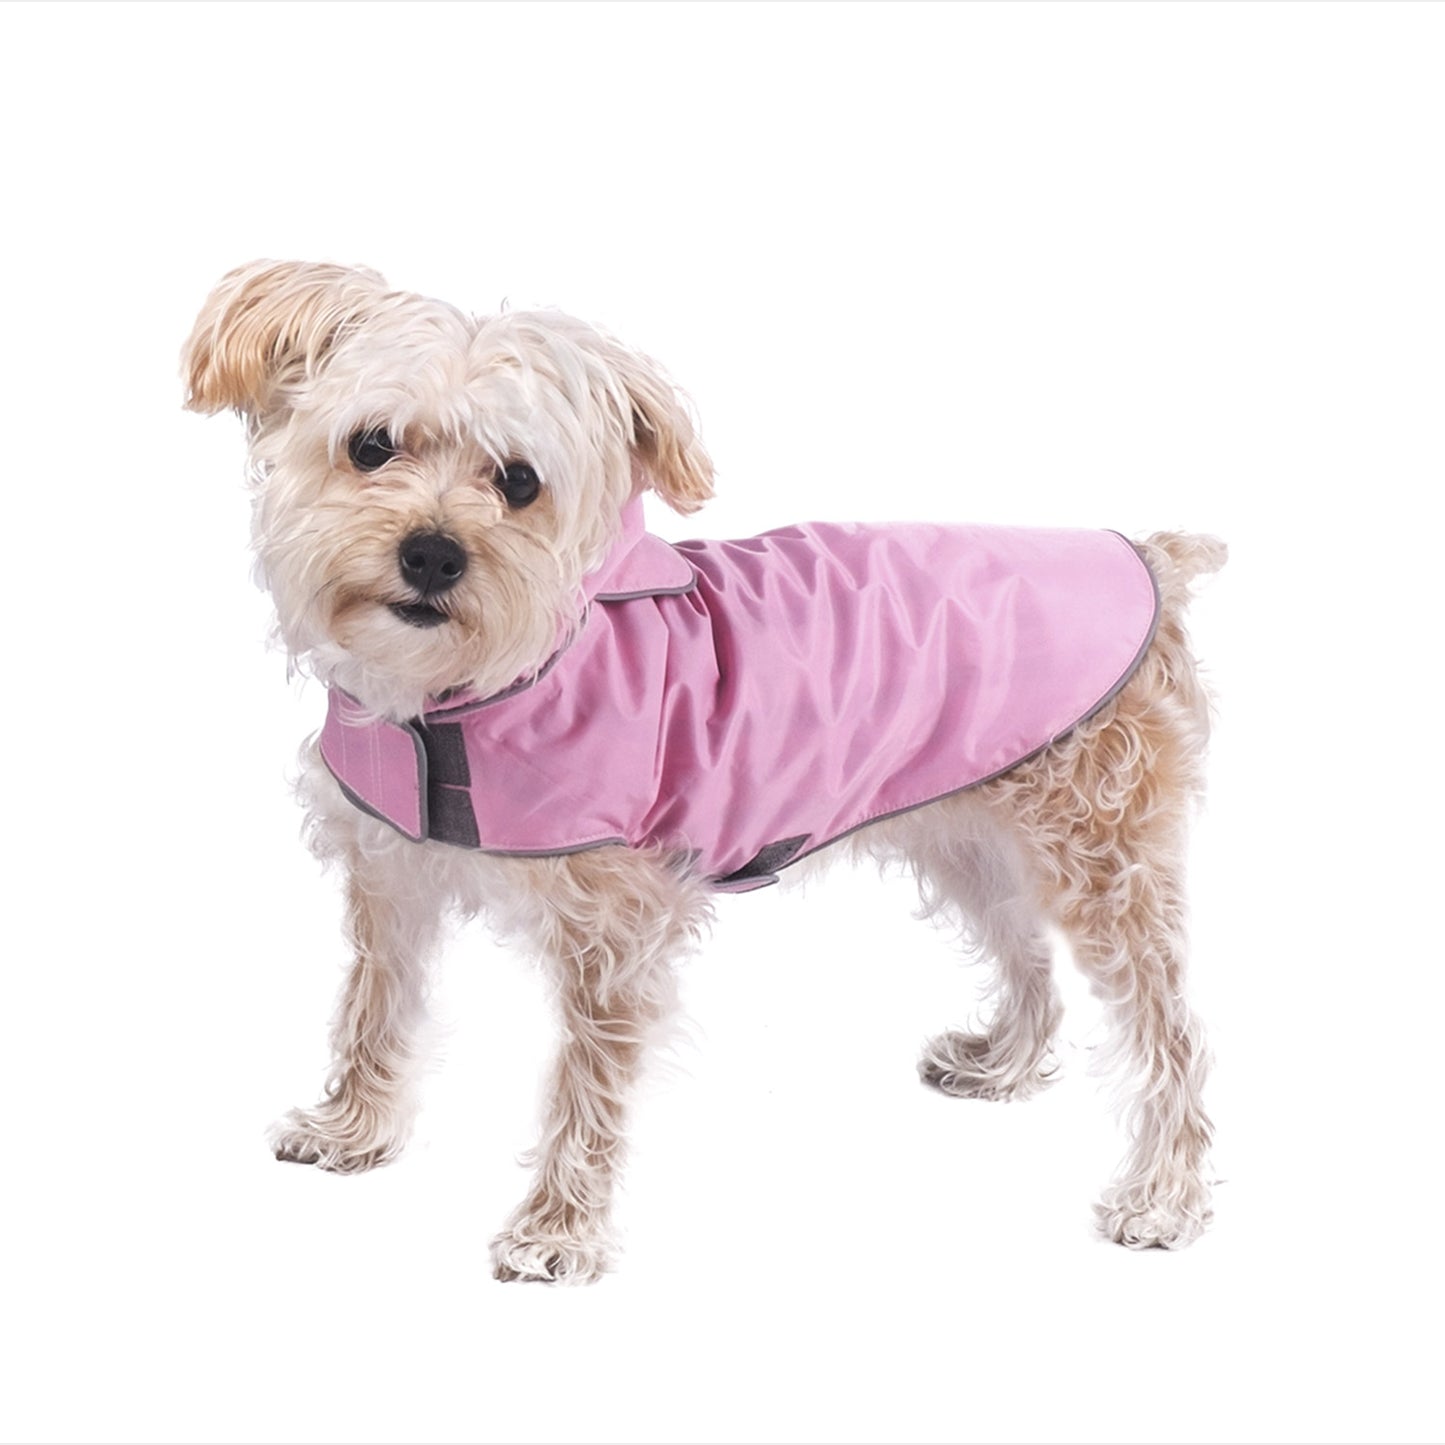 The Worthy Dog Chaqueta Impermeable Seattle Para Perros